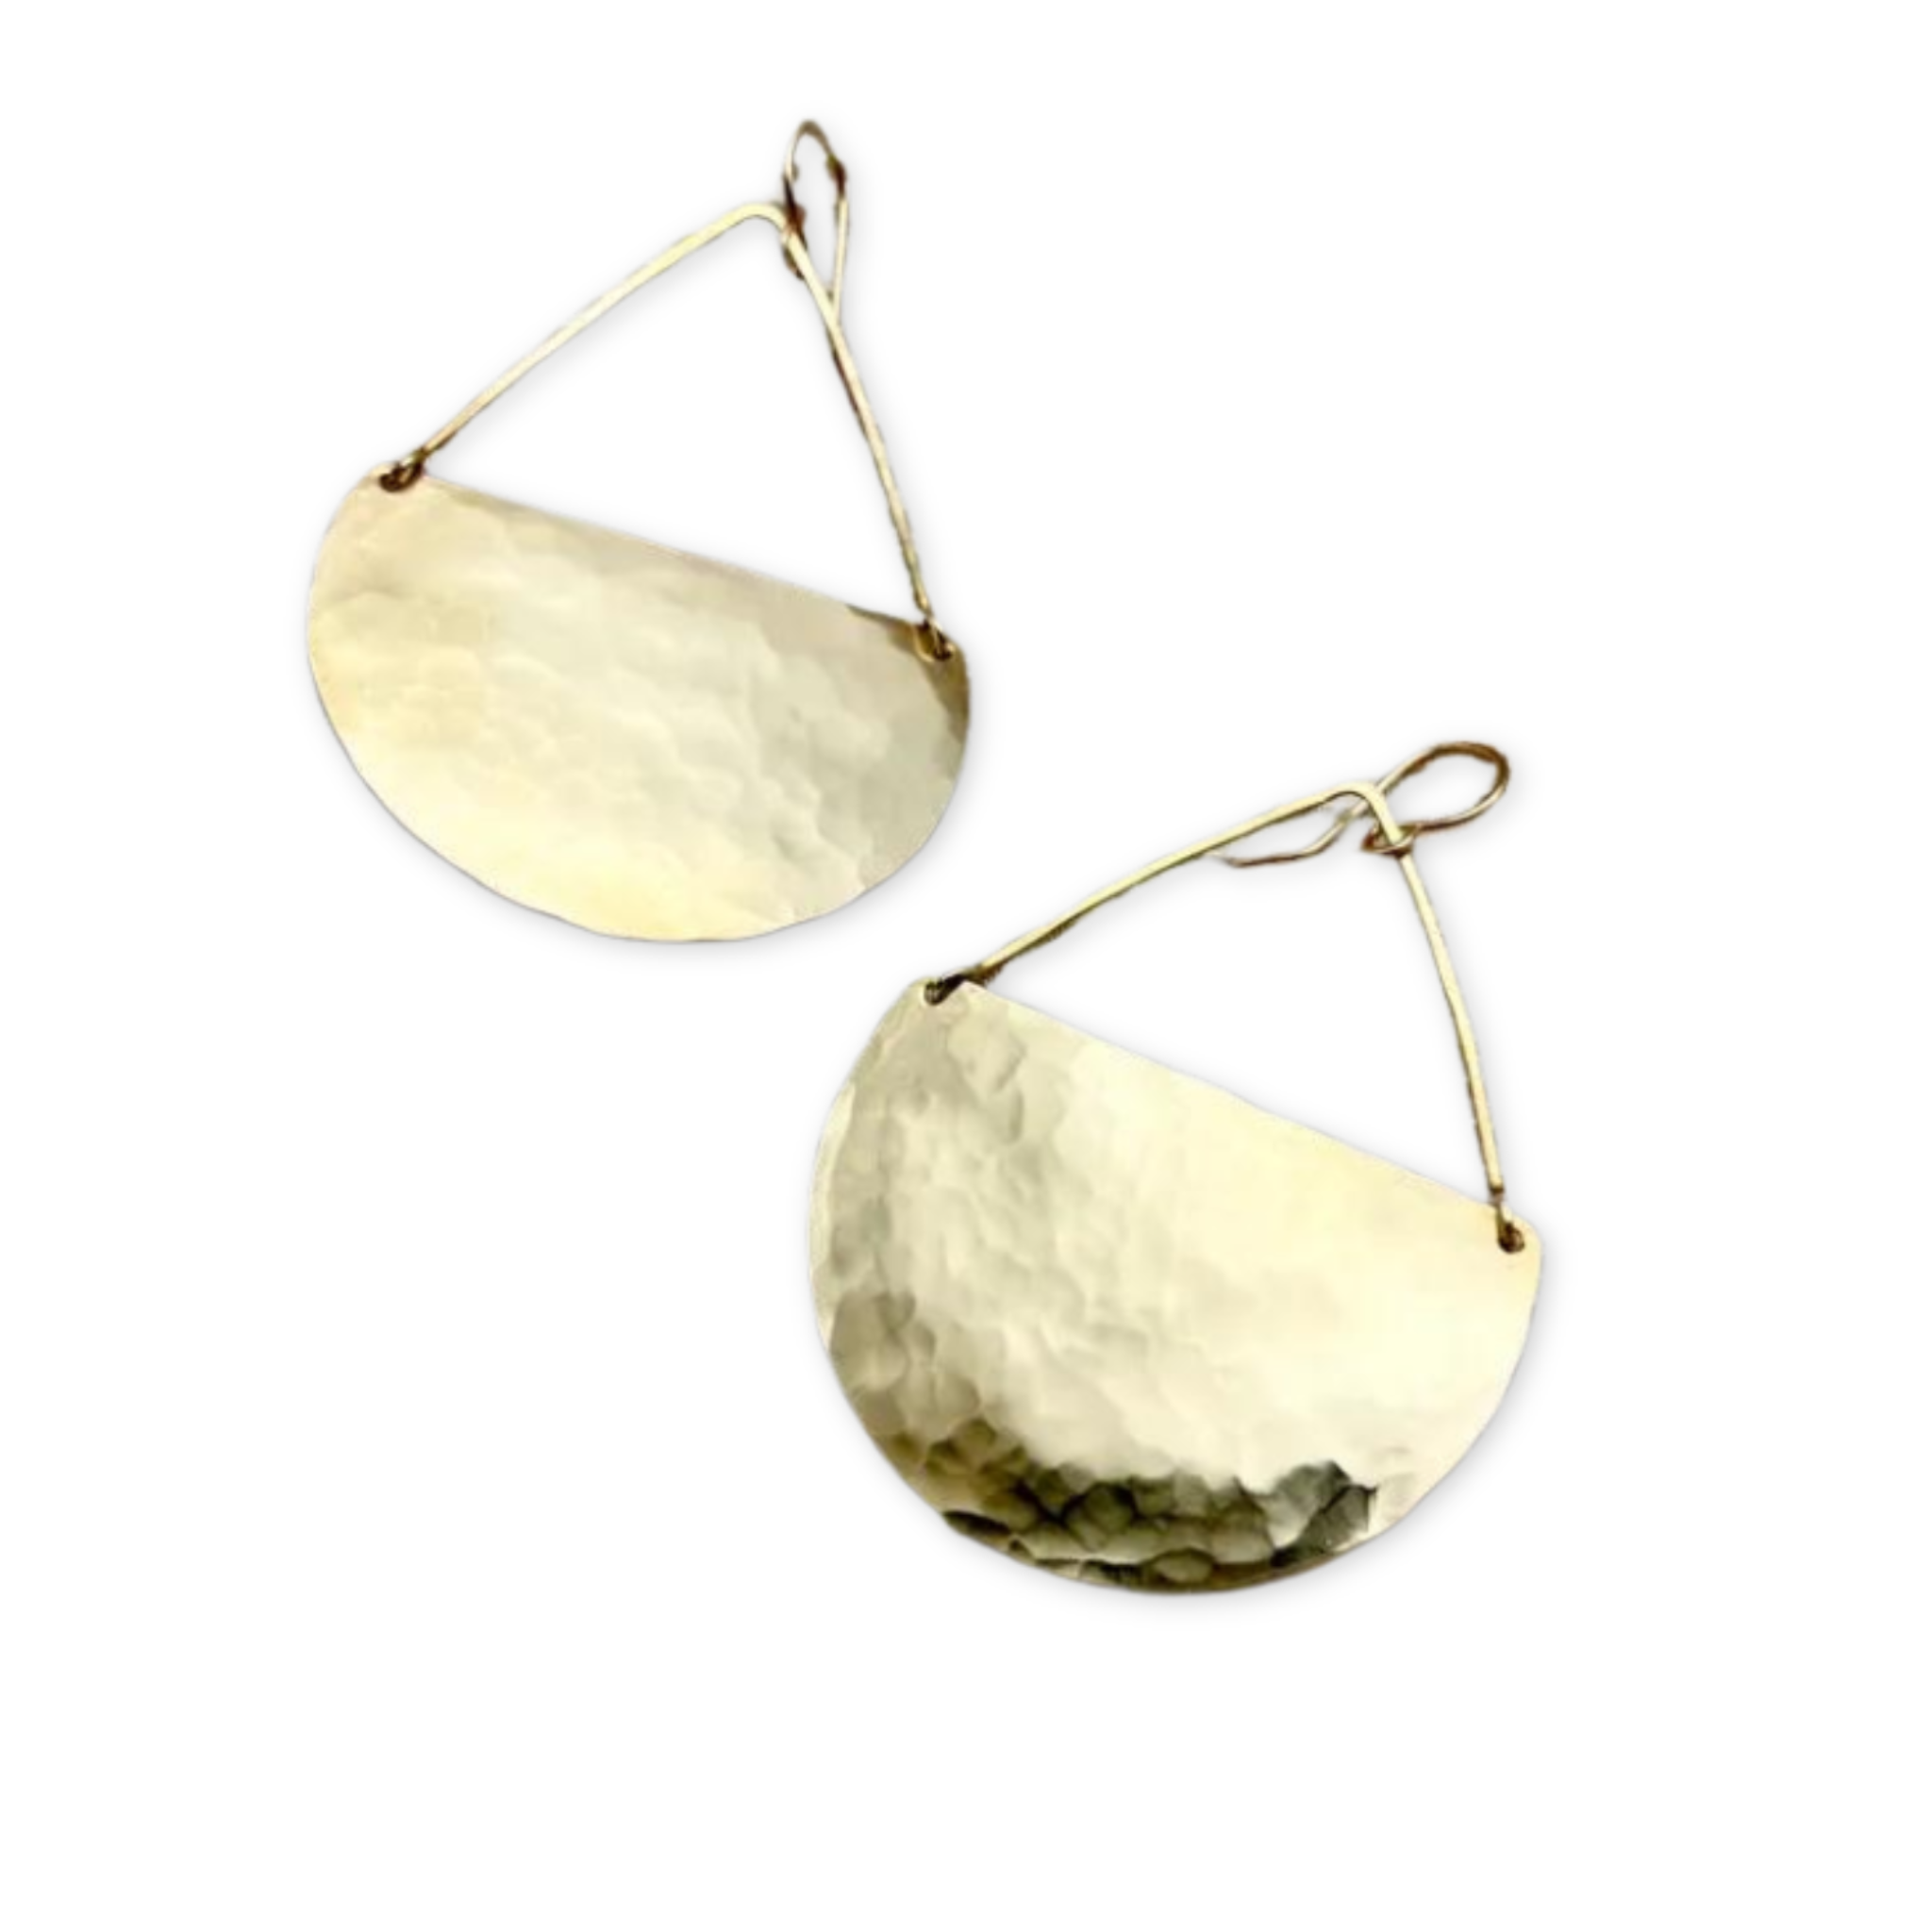 earrings featuring a hammered half circle pendant hanging from a triangle wire 